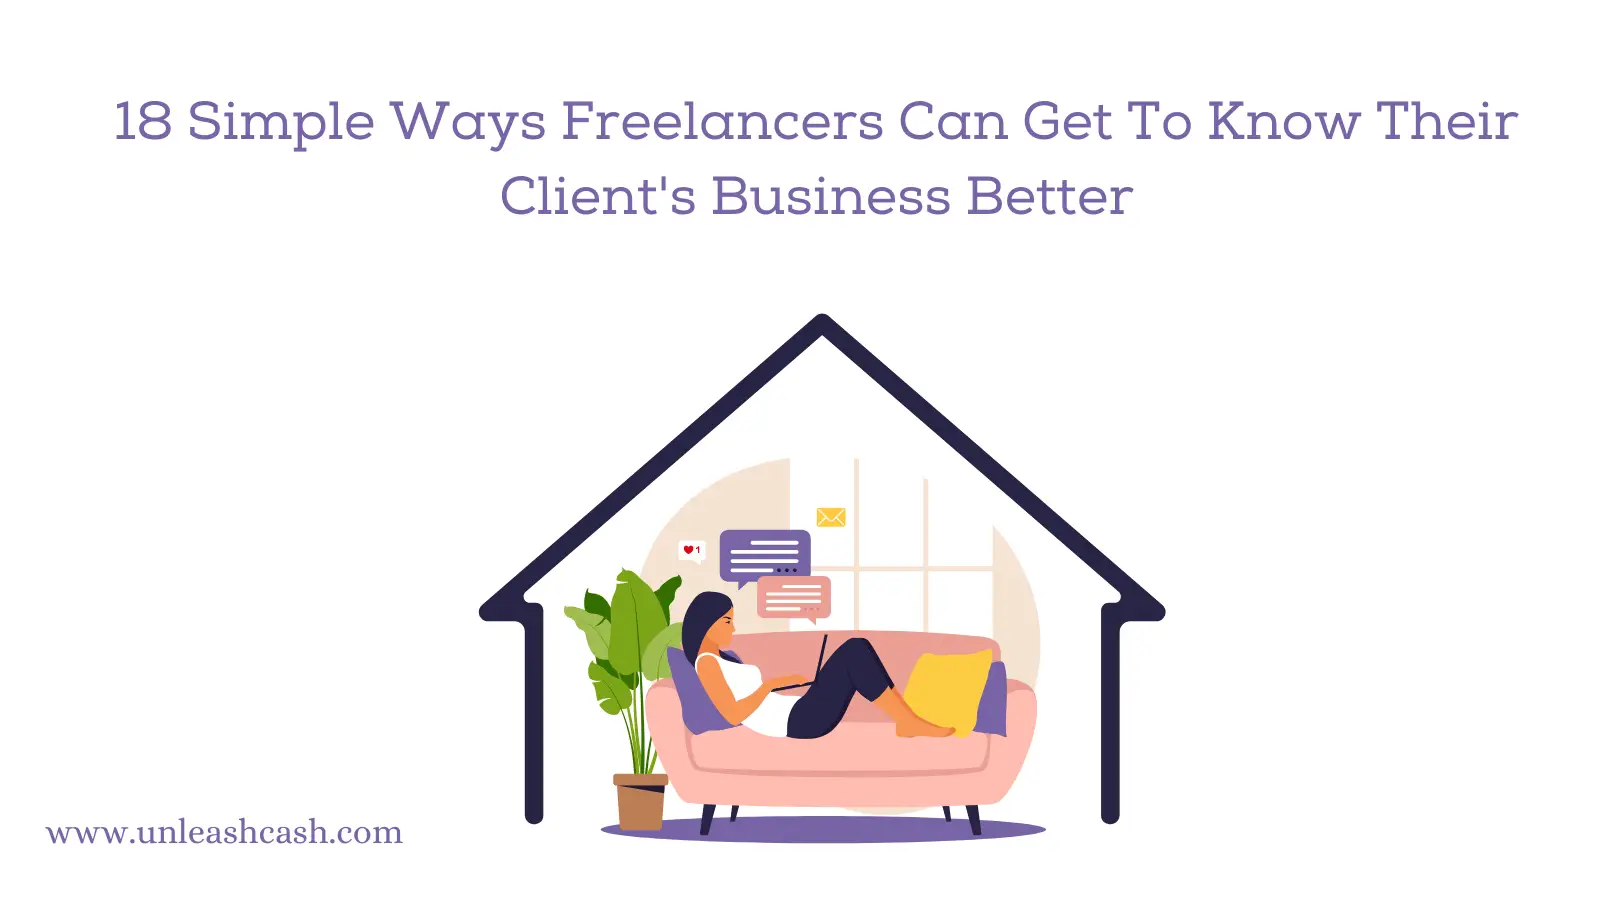 18 Simple Ways Freelancers Can Get To Know Their Client's Business Better